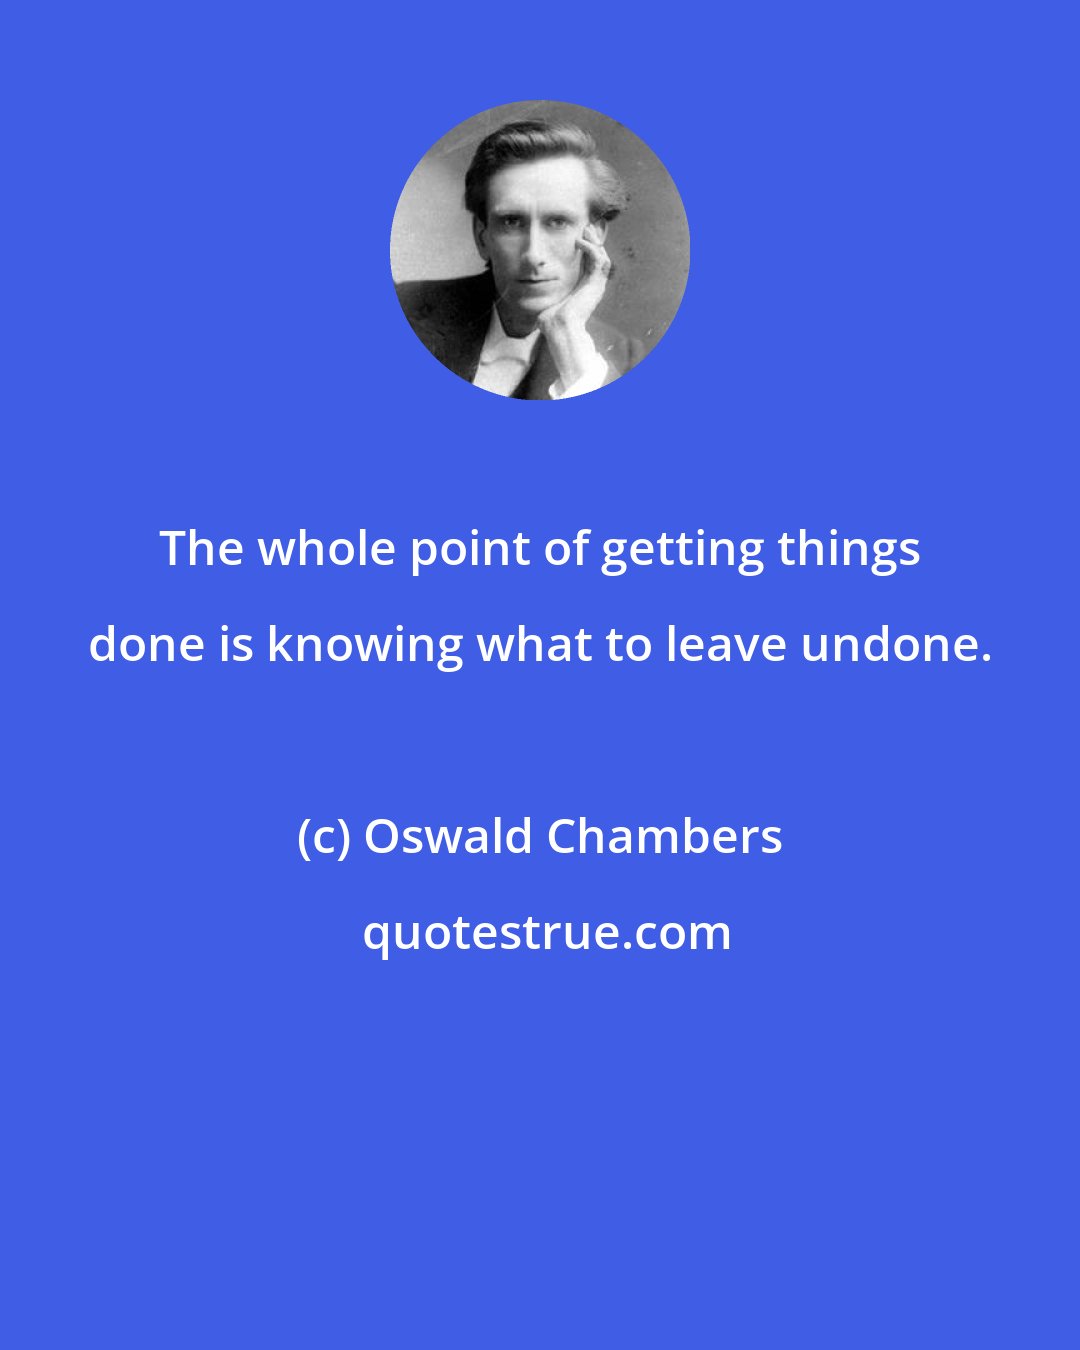 Oswald Chambers: The whole point of getting things done is knowing what to leave undone.